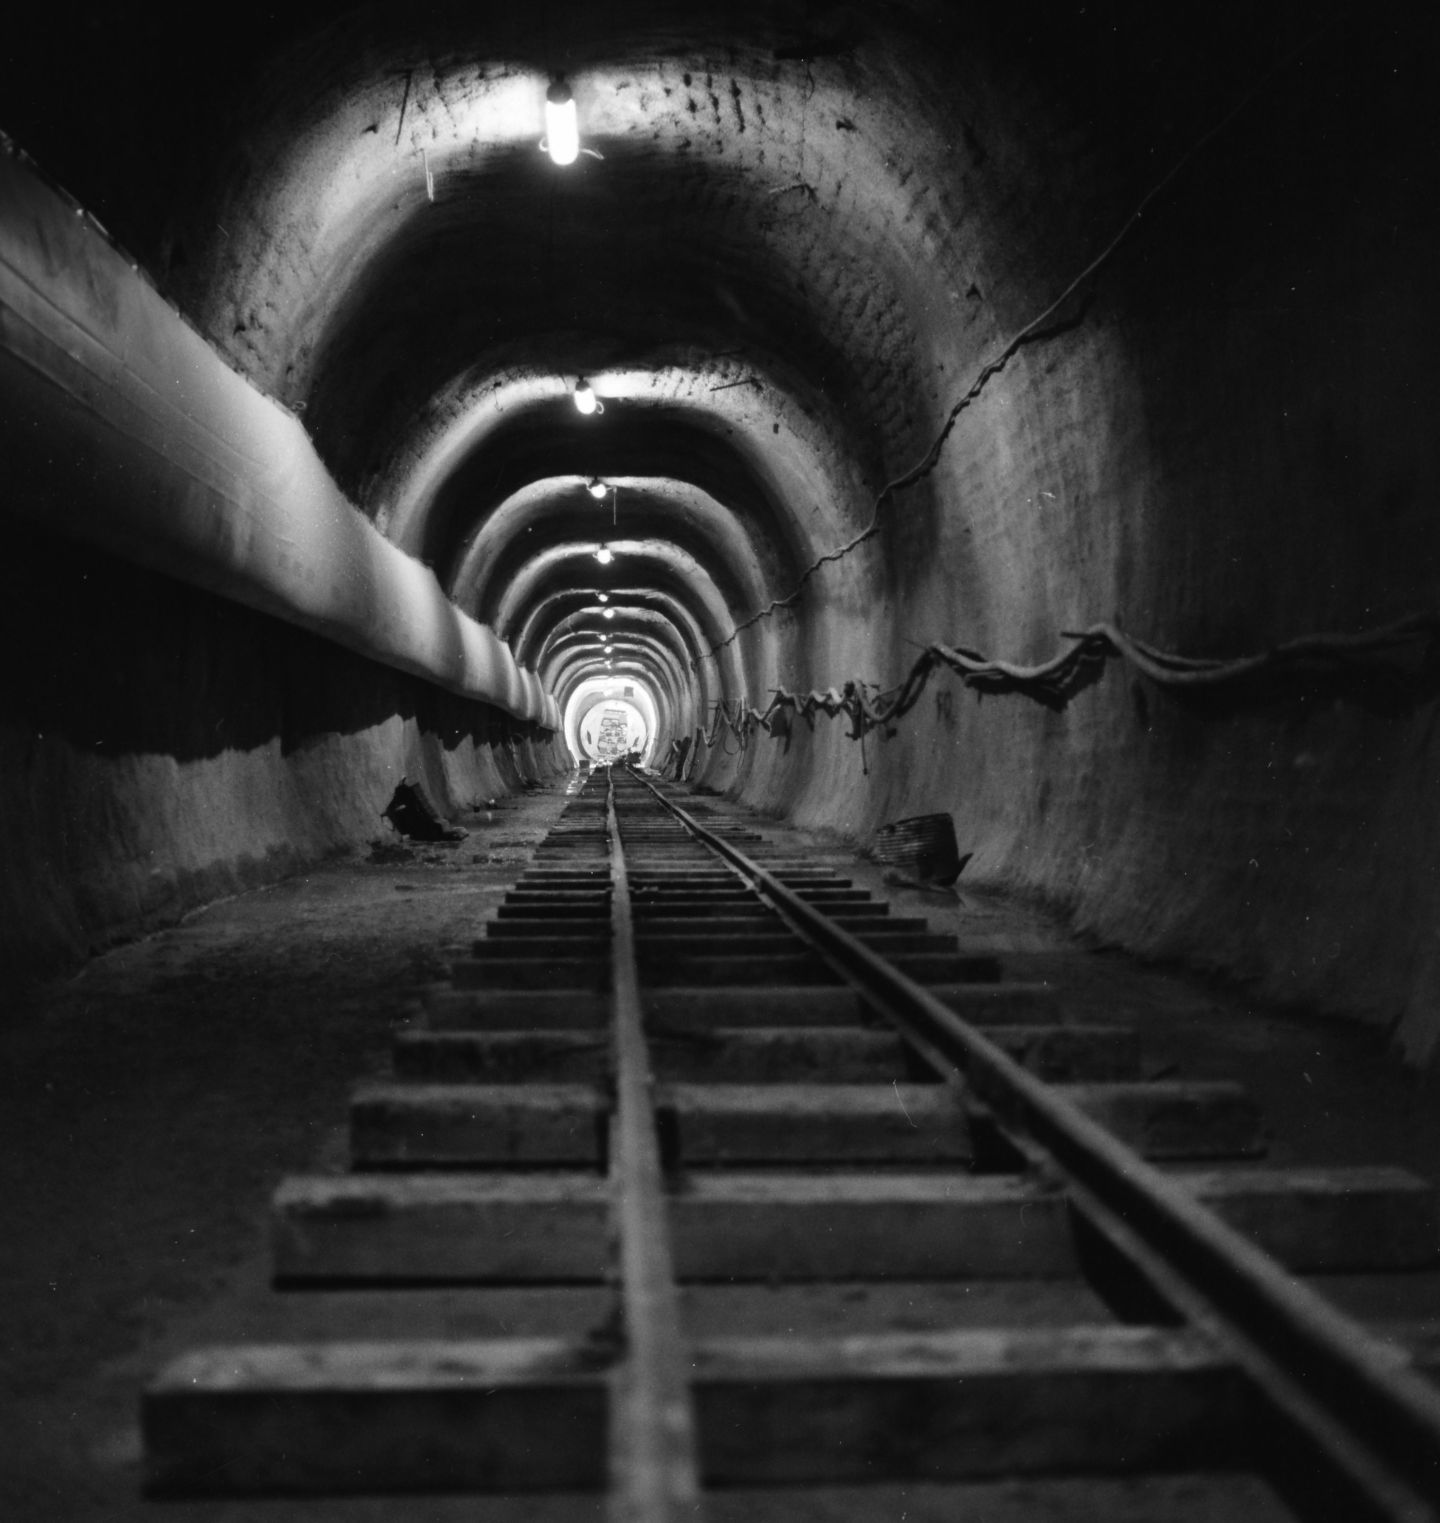 The LEP/LHC tunnel in 1985. Three tunnel-boring machines started excavating the tunnel in February 1985 and the ring was completed three years later.